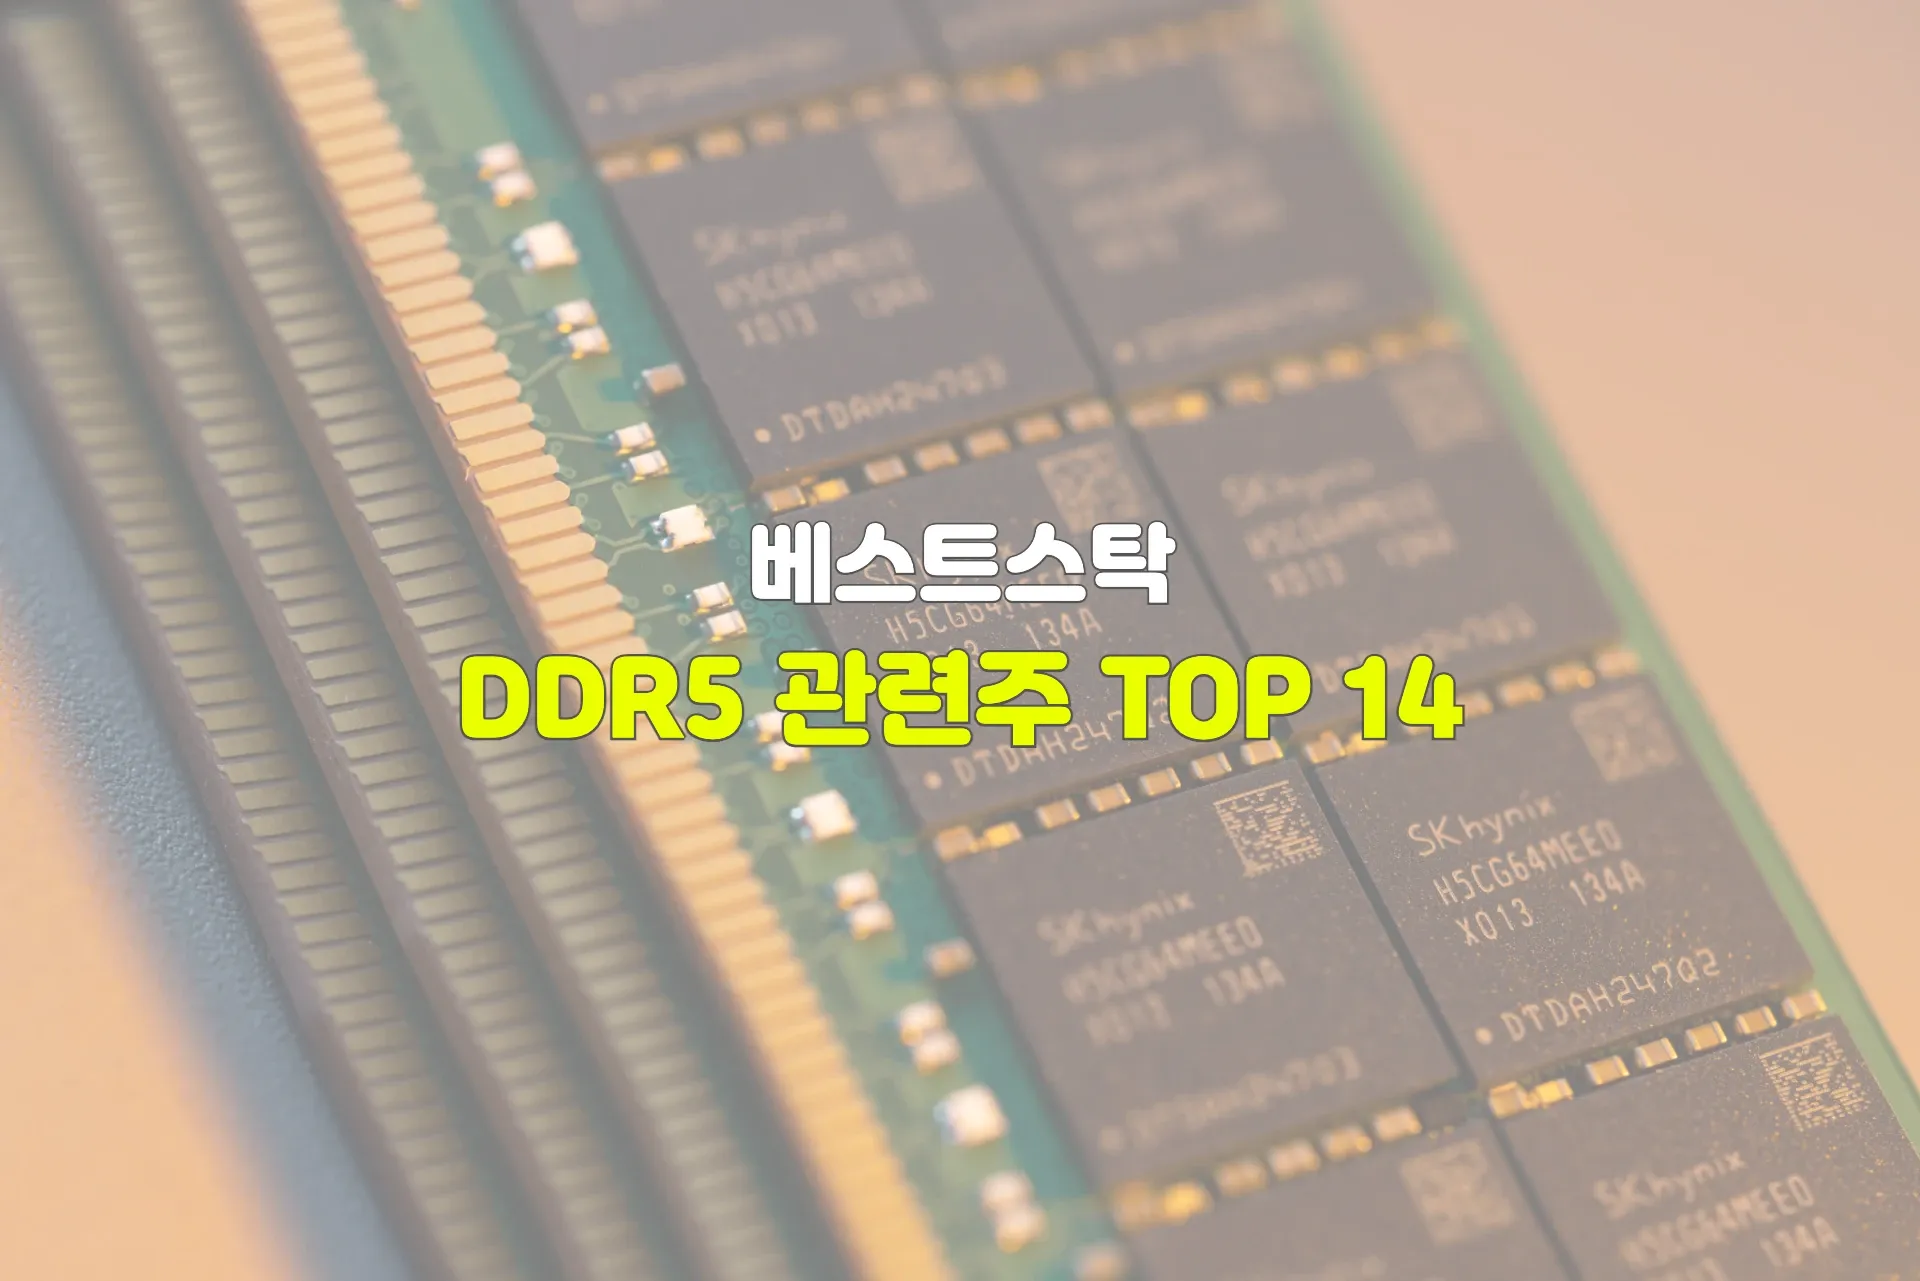 DDR5 관련주 TOP 14 썸네일